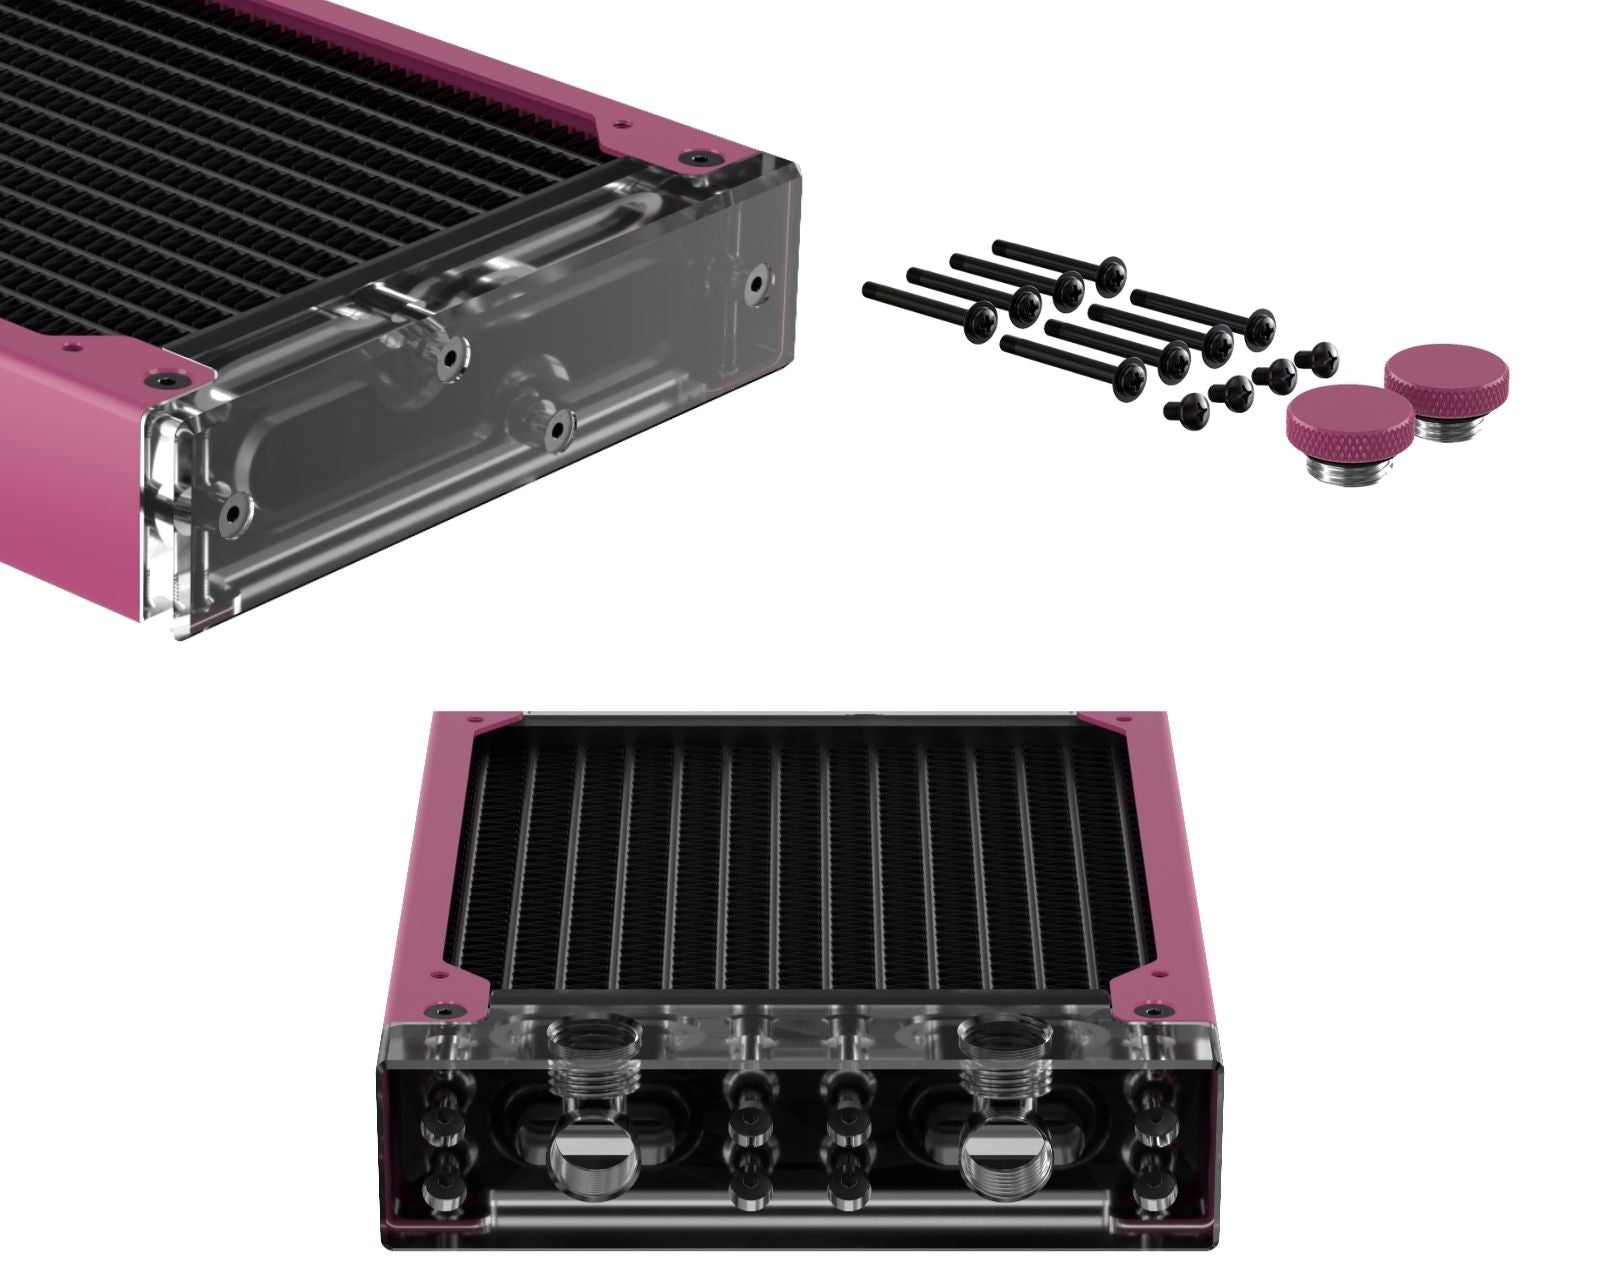 PrimoChill 240SL (30mm) EXIMO Modular Radiator, Clear Acrylic, 2x120mm, Dual Fan (R-SL-A24) Available in 20+ Colors, Assembled in USA and Custom Watercooling Loop Ready - Magenta